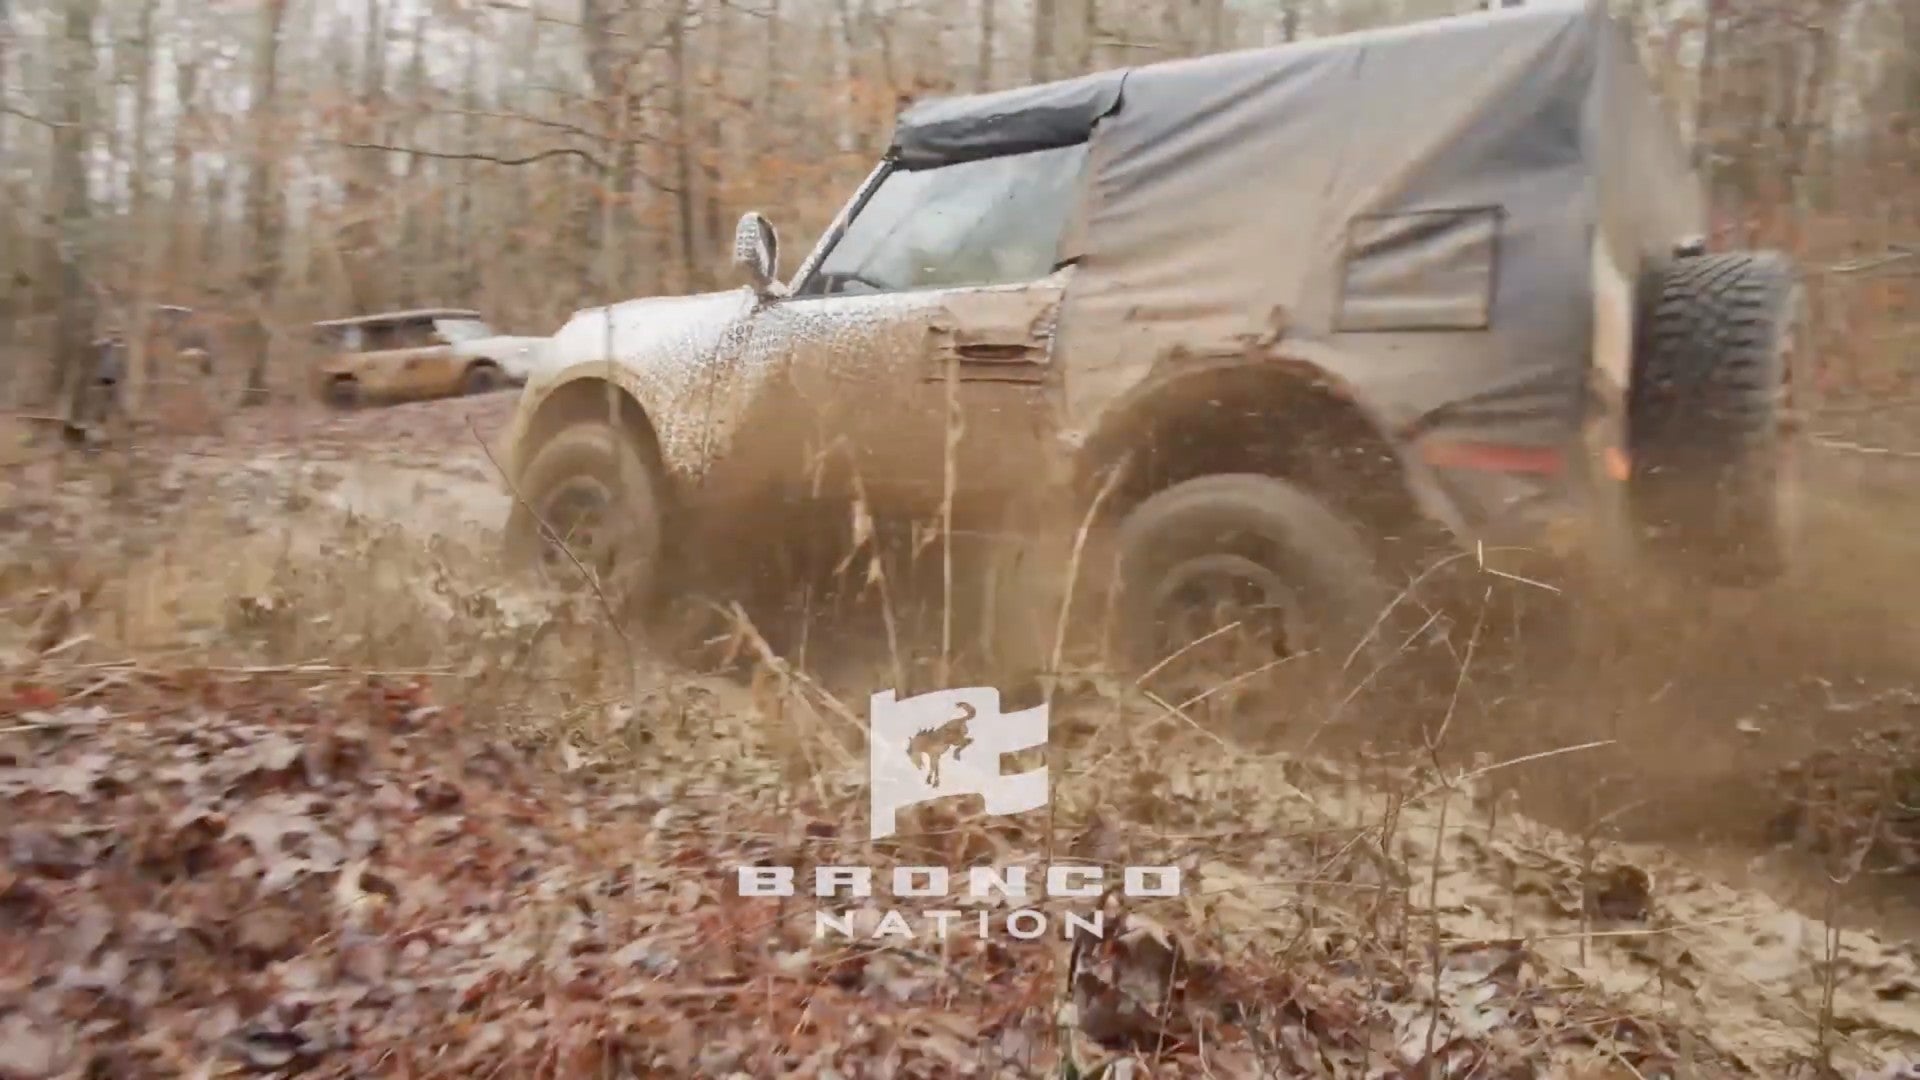 Video Gives Best Look Yet at 2021 Ford Bronco Being Abused Off-Road